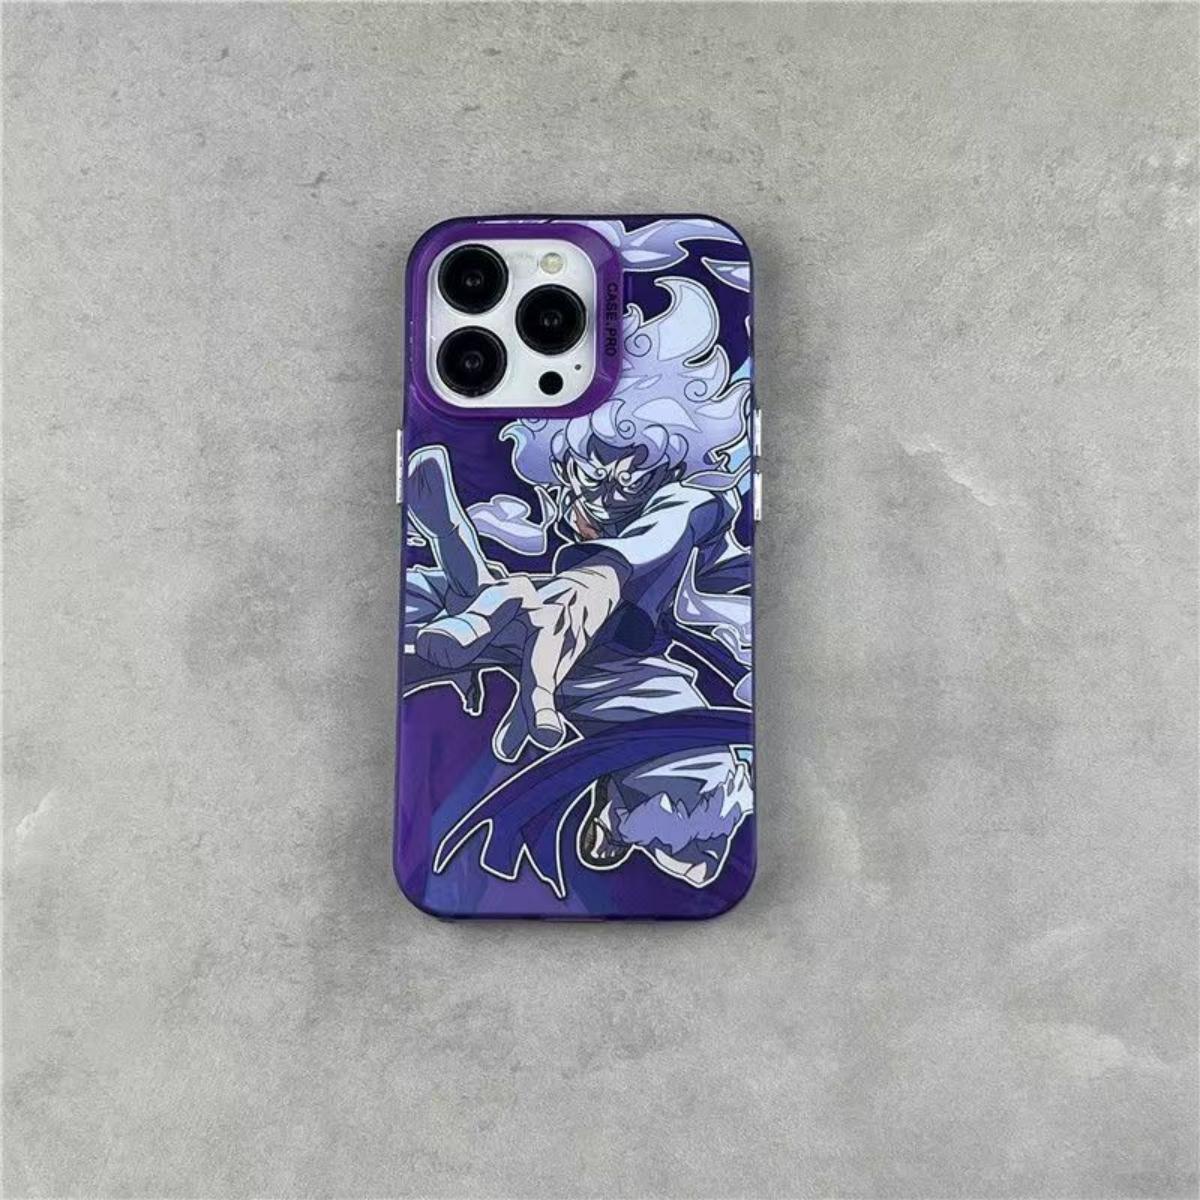 Personalized cool phone cases with Luffy, Zoro patterns